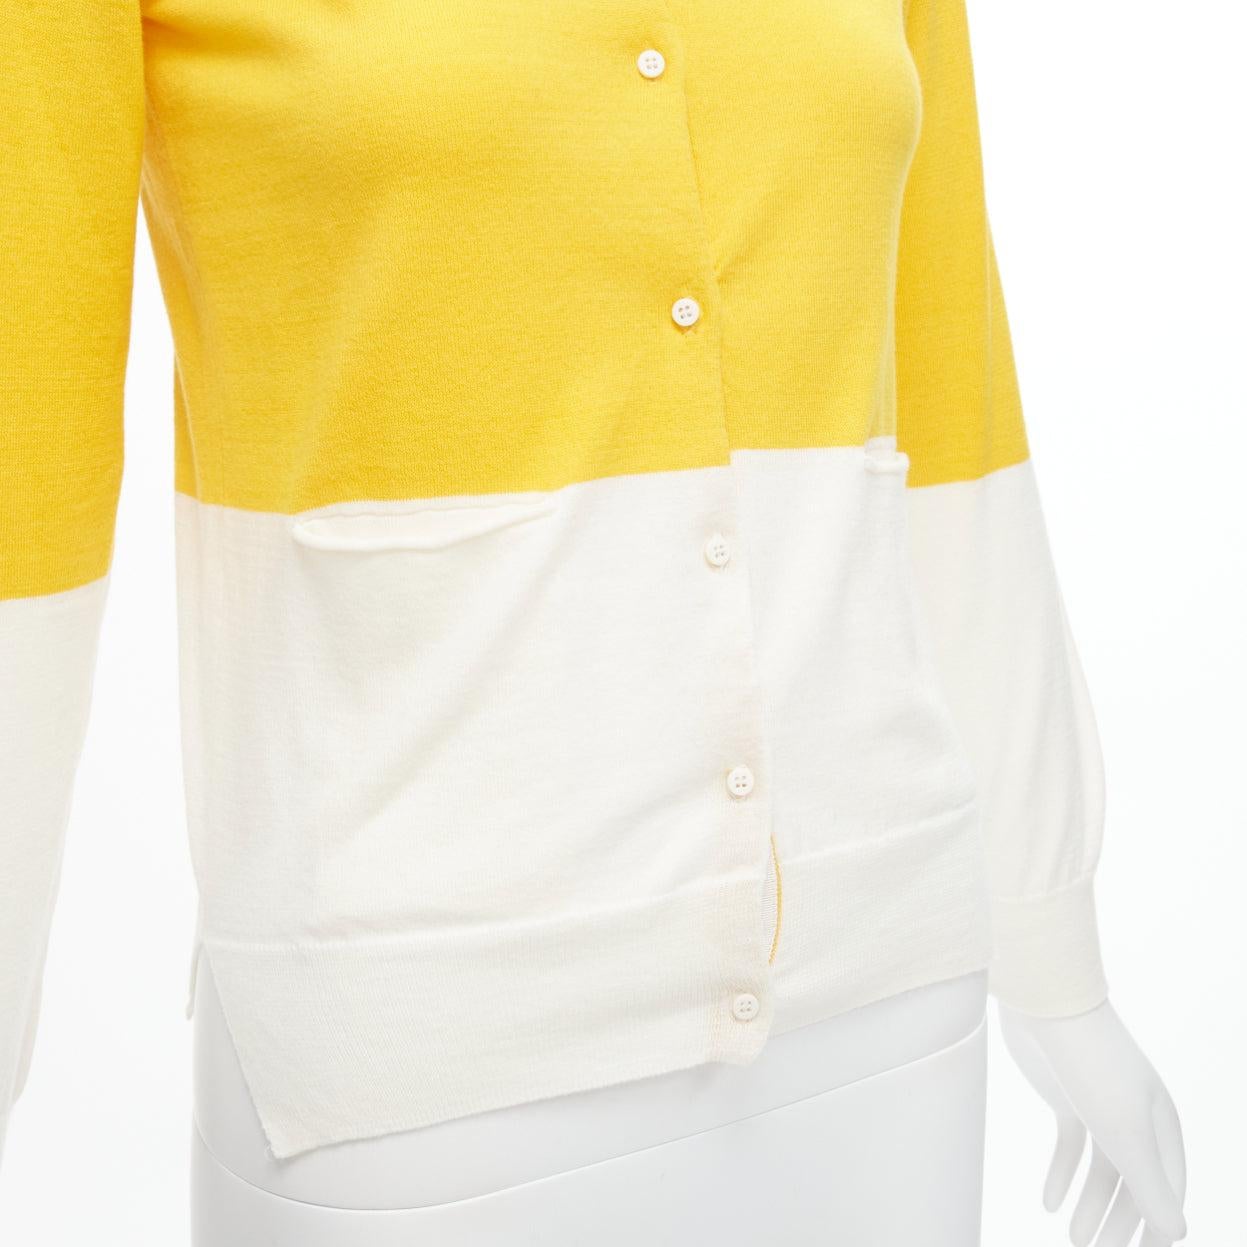 STELLA MCCARTNEY yellow white colorblock cotton pocketed cardigan sweater 12y
Reference: SNKO/A00239
Brand: Stella McCartney
Designer: Stella McCartney
Material: Cotton
Color: Yellow, White
Pattern: Solid
Closure: Button
Extra Details: Yellow and